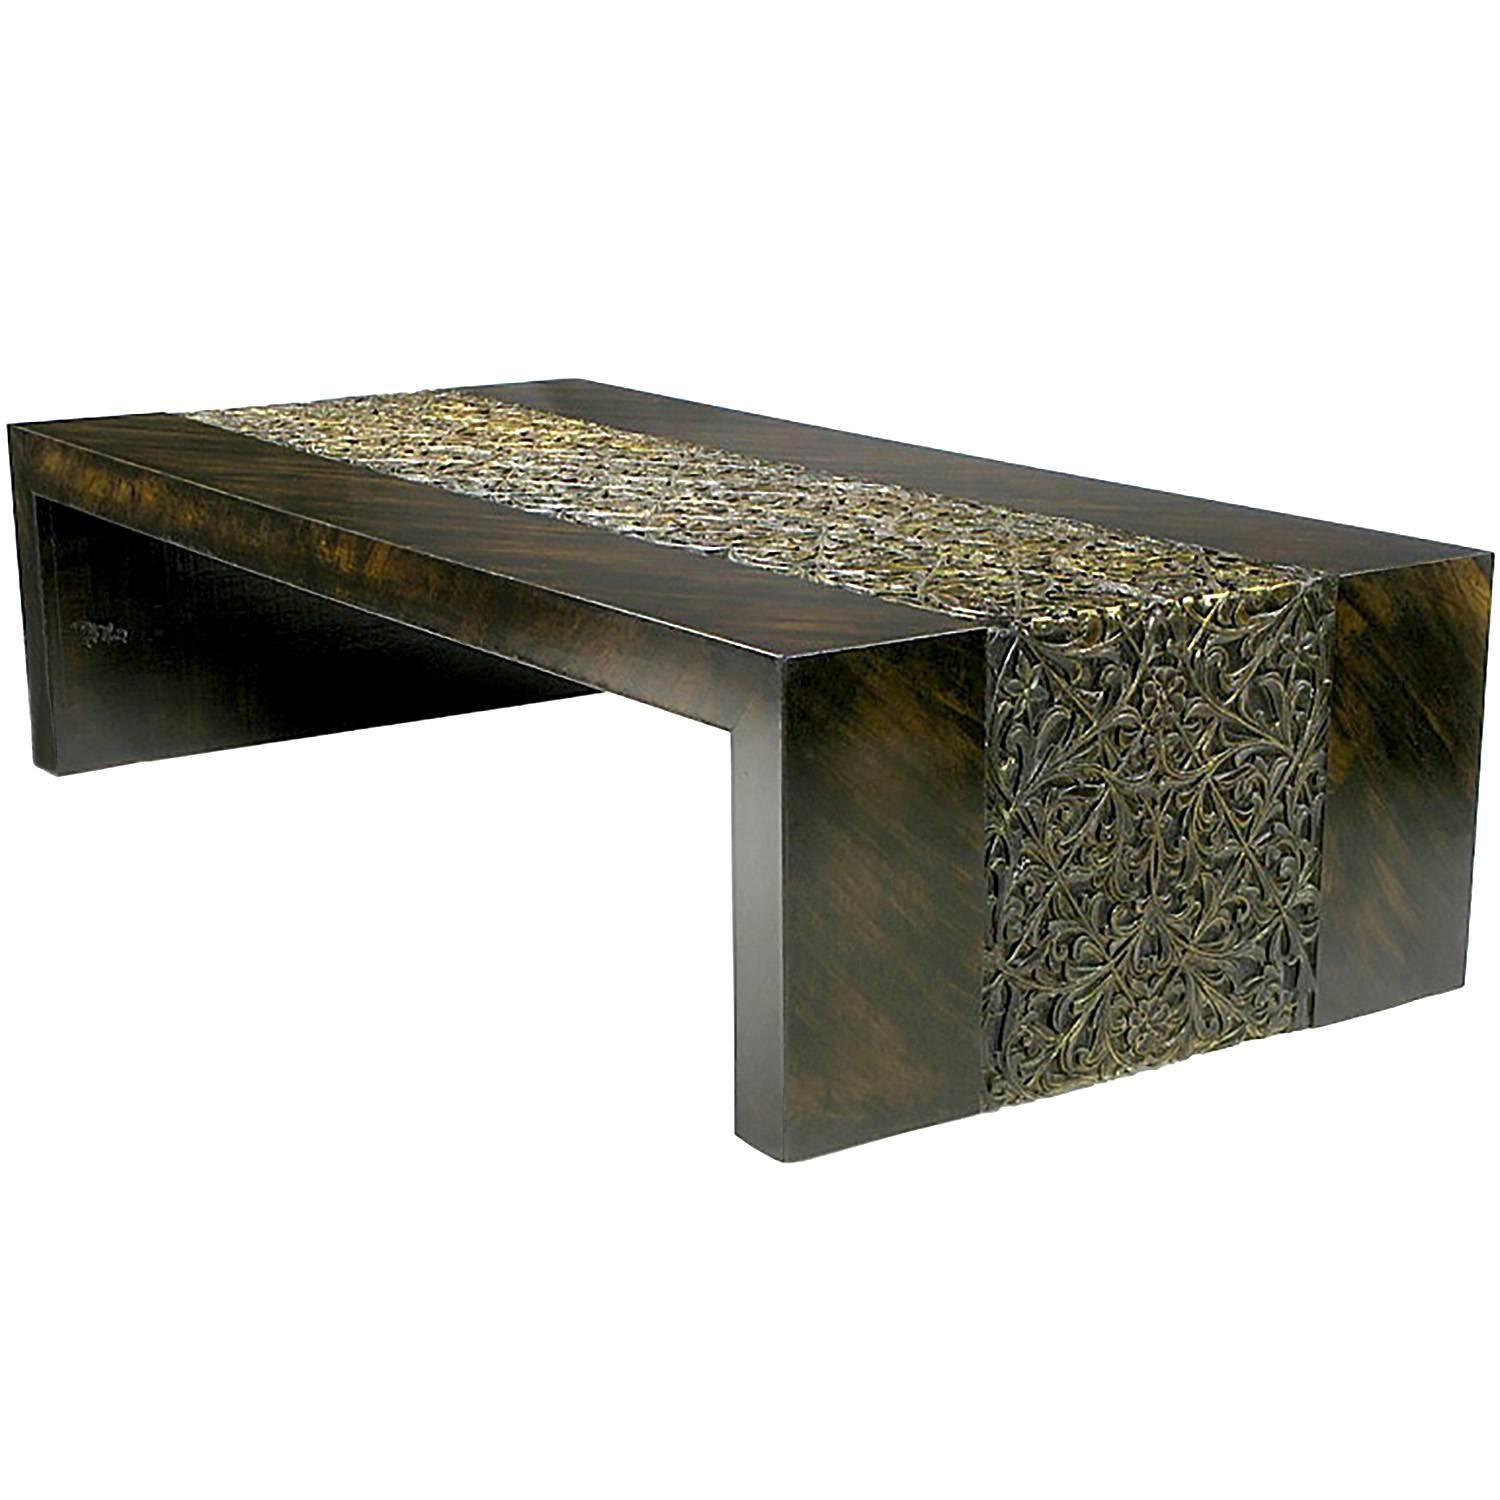 Phyllis Morris Hand Painted Zebrano Wood and Gilt Arabesque Coffee Table For Sale